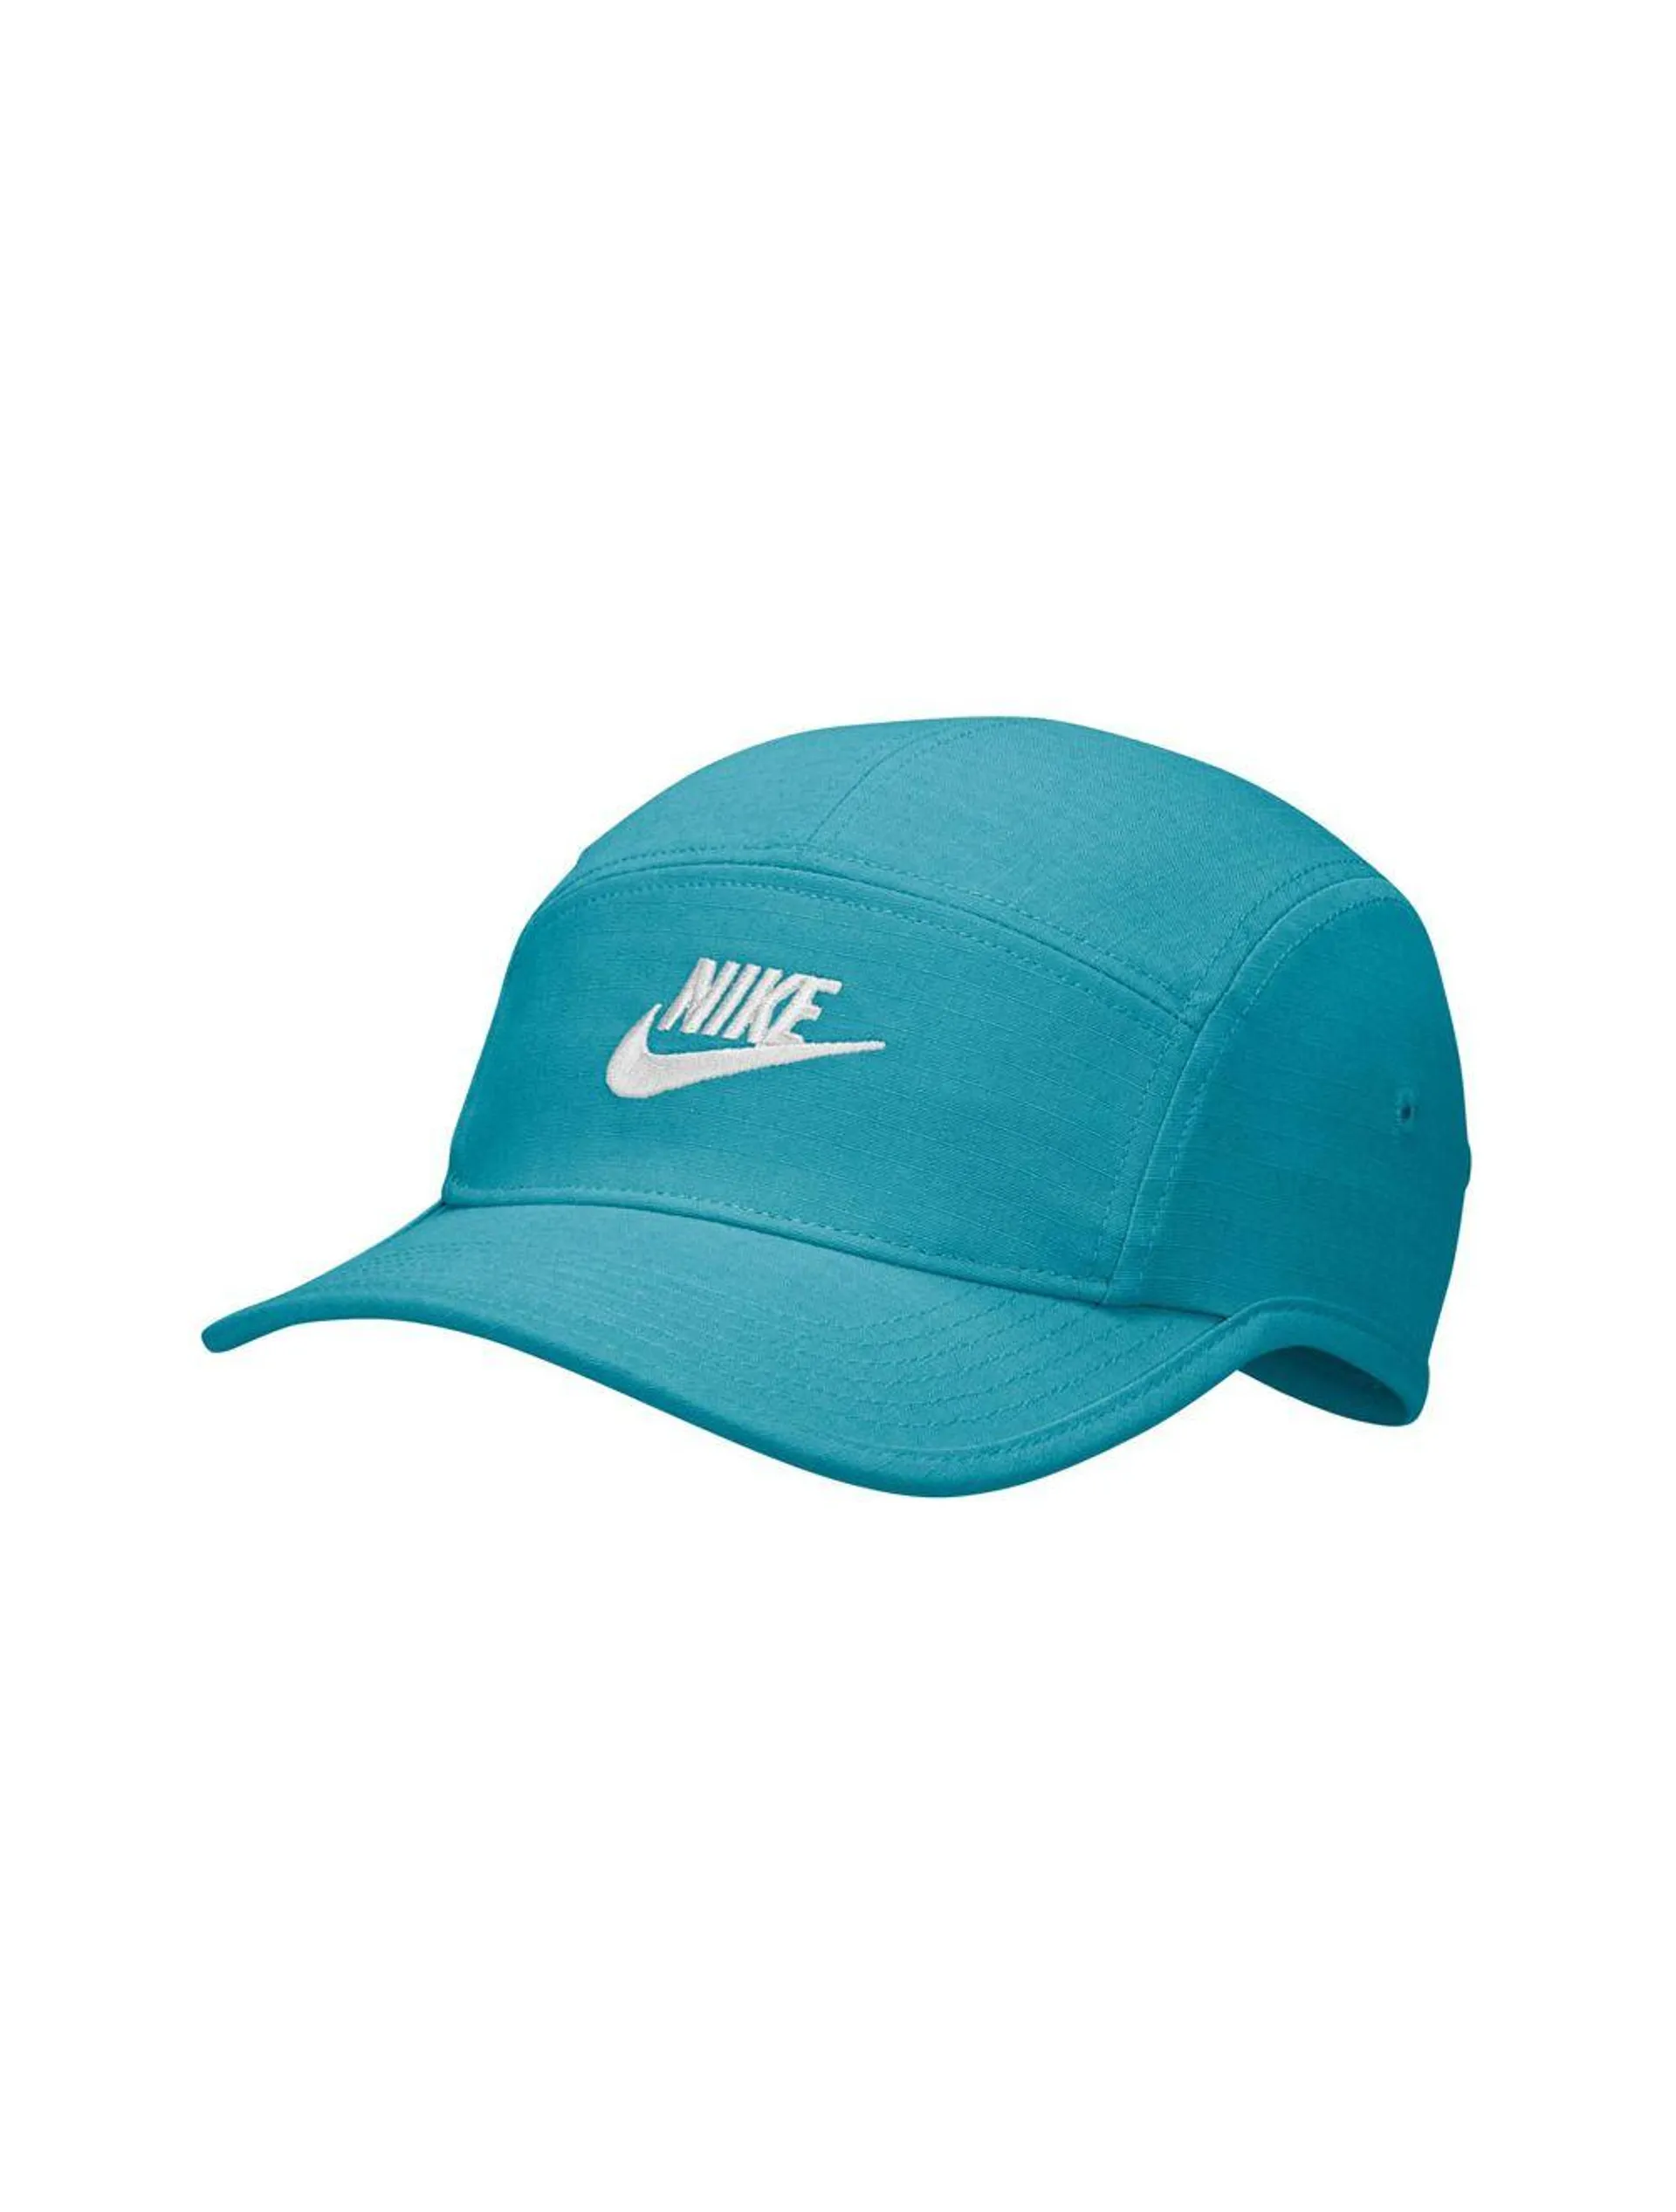 Nike Fly Unstructured Futura Cap Cactus/White